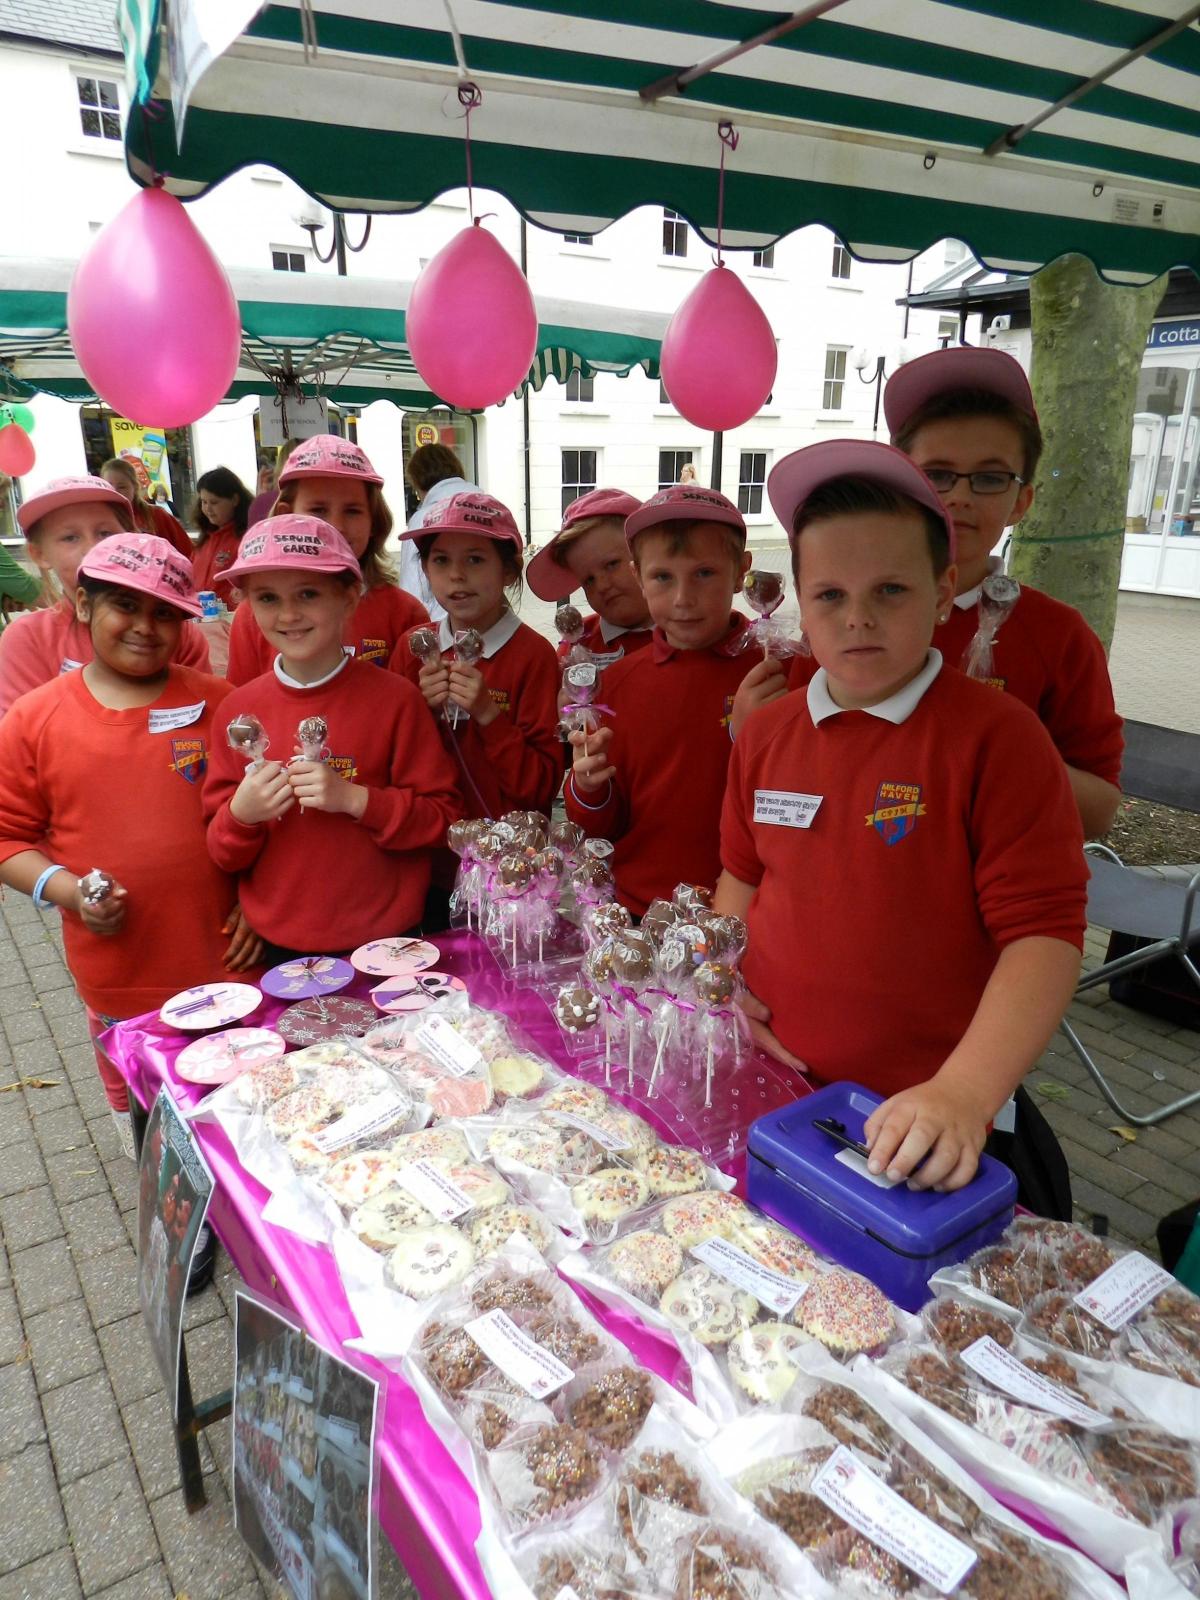 The Yummy Scrummy Crazy Cake Company from Milford Haven Junior School looked very professional with their pink branded  baseball caps and special cakes and labels.